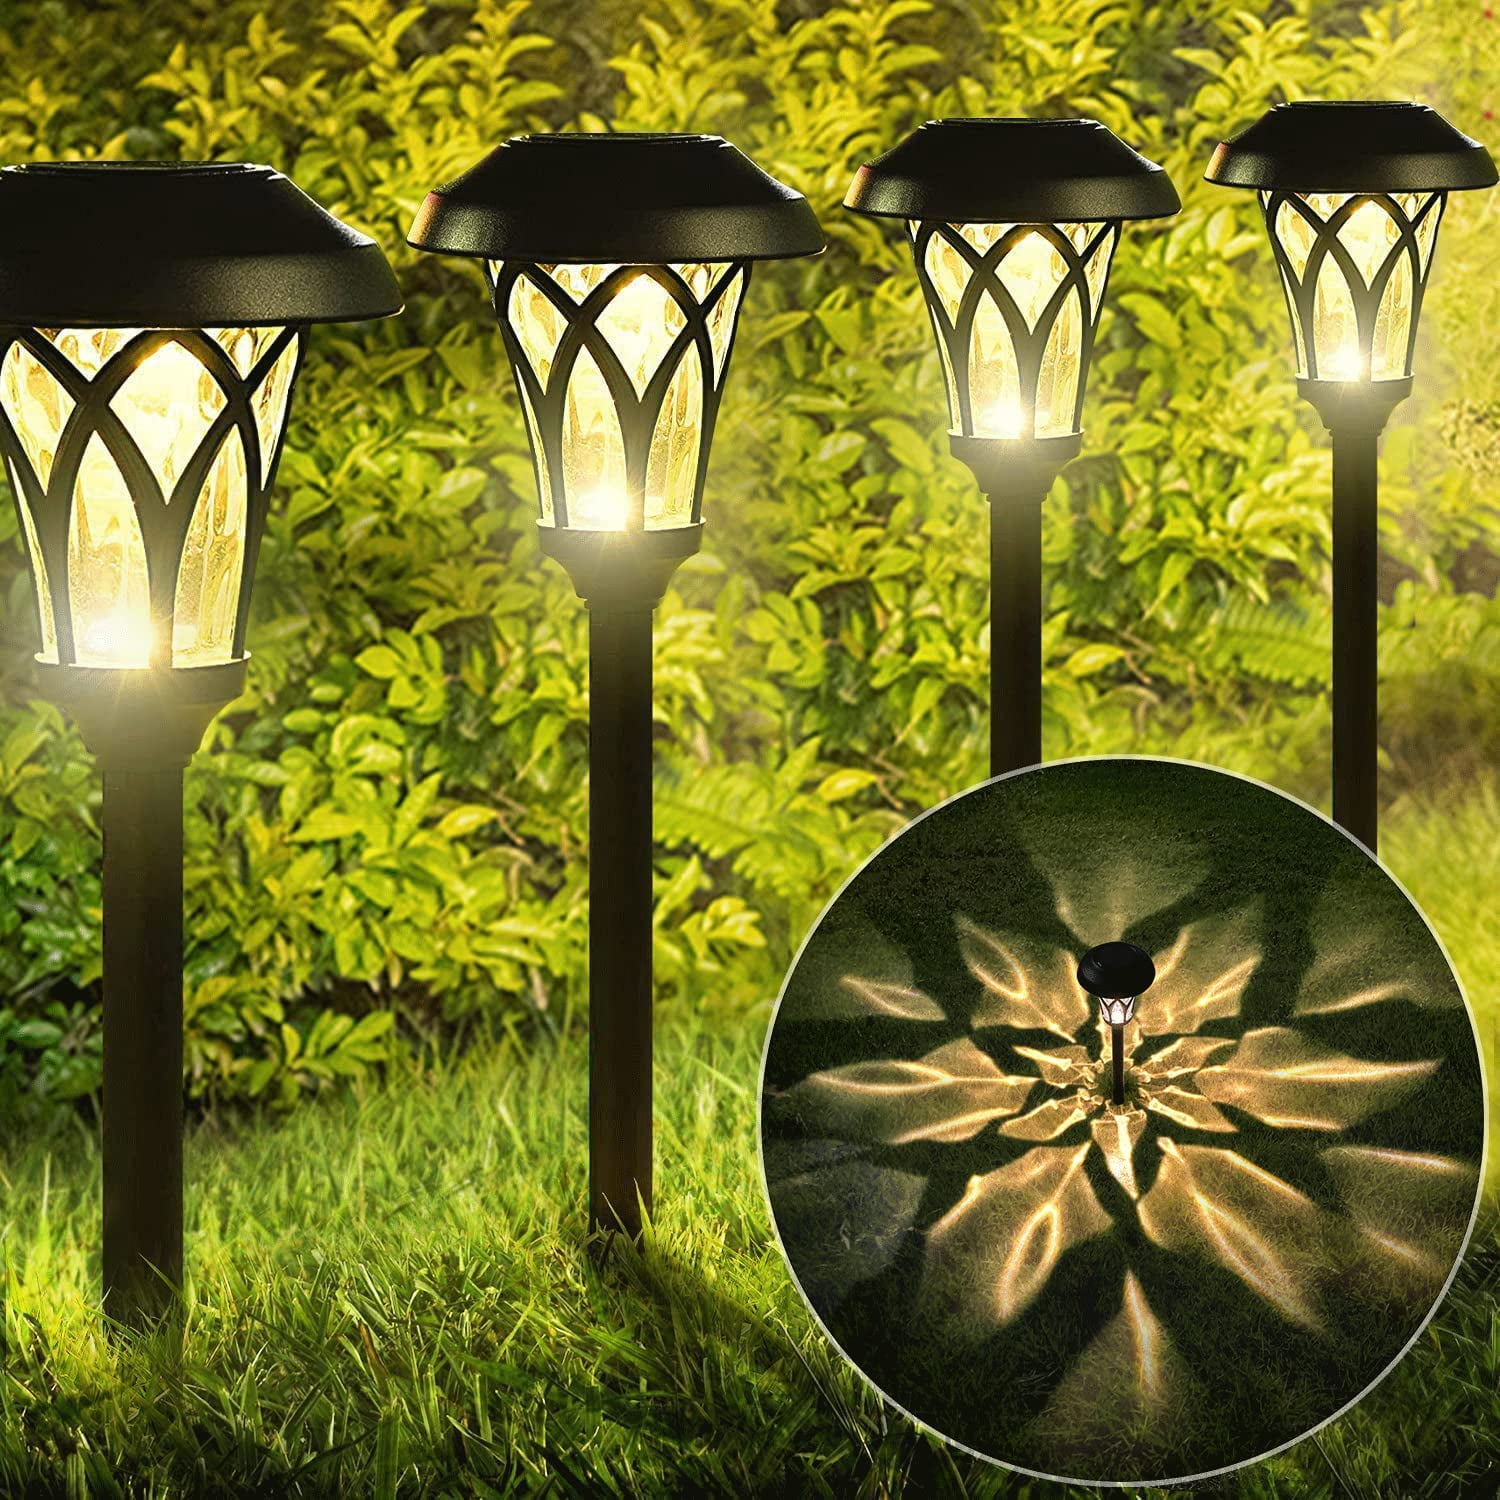 BEAU JARDIN Pack Glass Solar Pathway Landscape Lights LED Stainless Steel  Waterproof Bright Outdoor Garden with Stakes Auto On/Off Sun Powered Warm  White Lighting Walkway Metal Pattern Black BG320